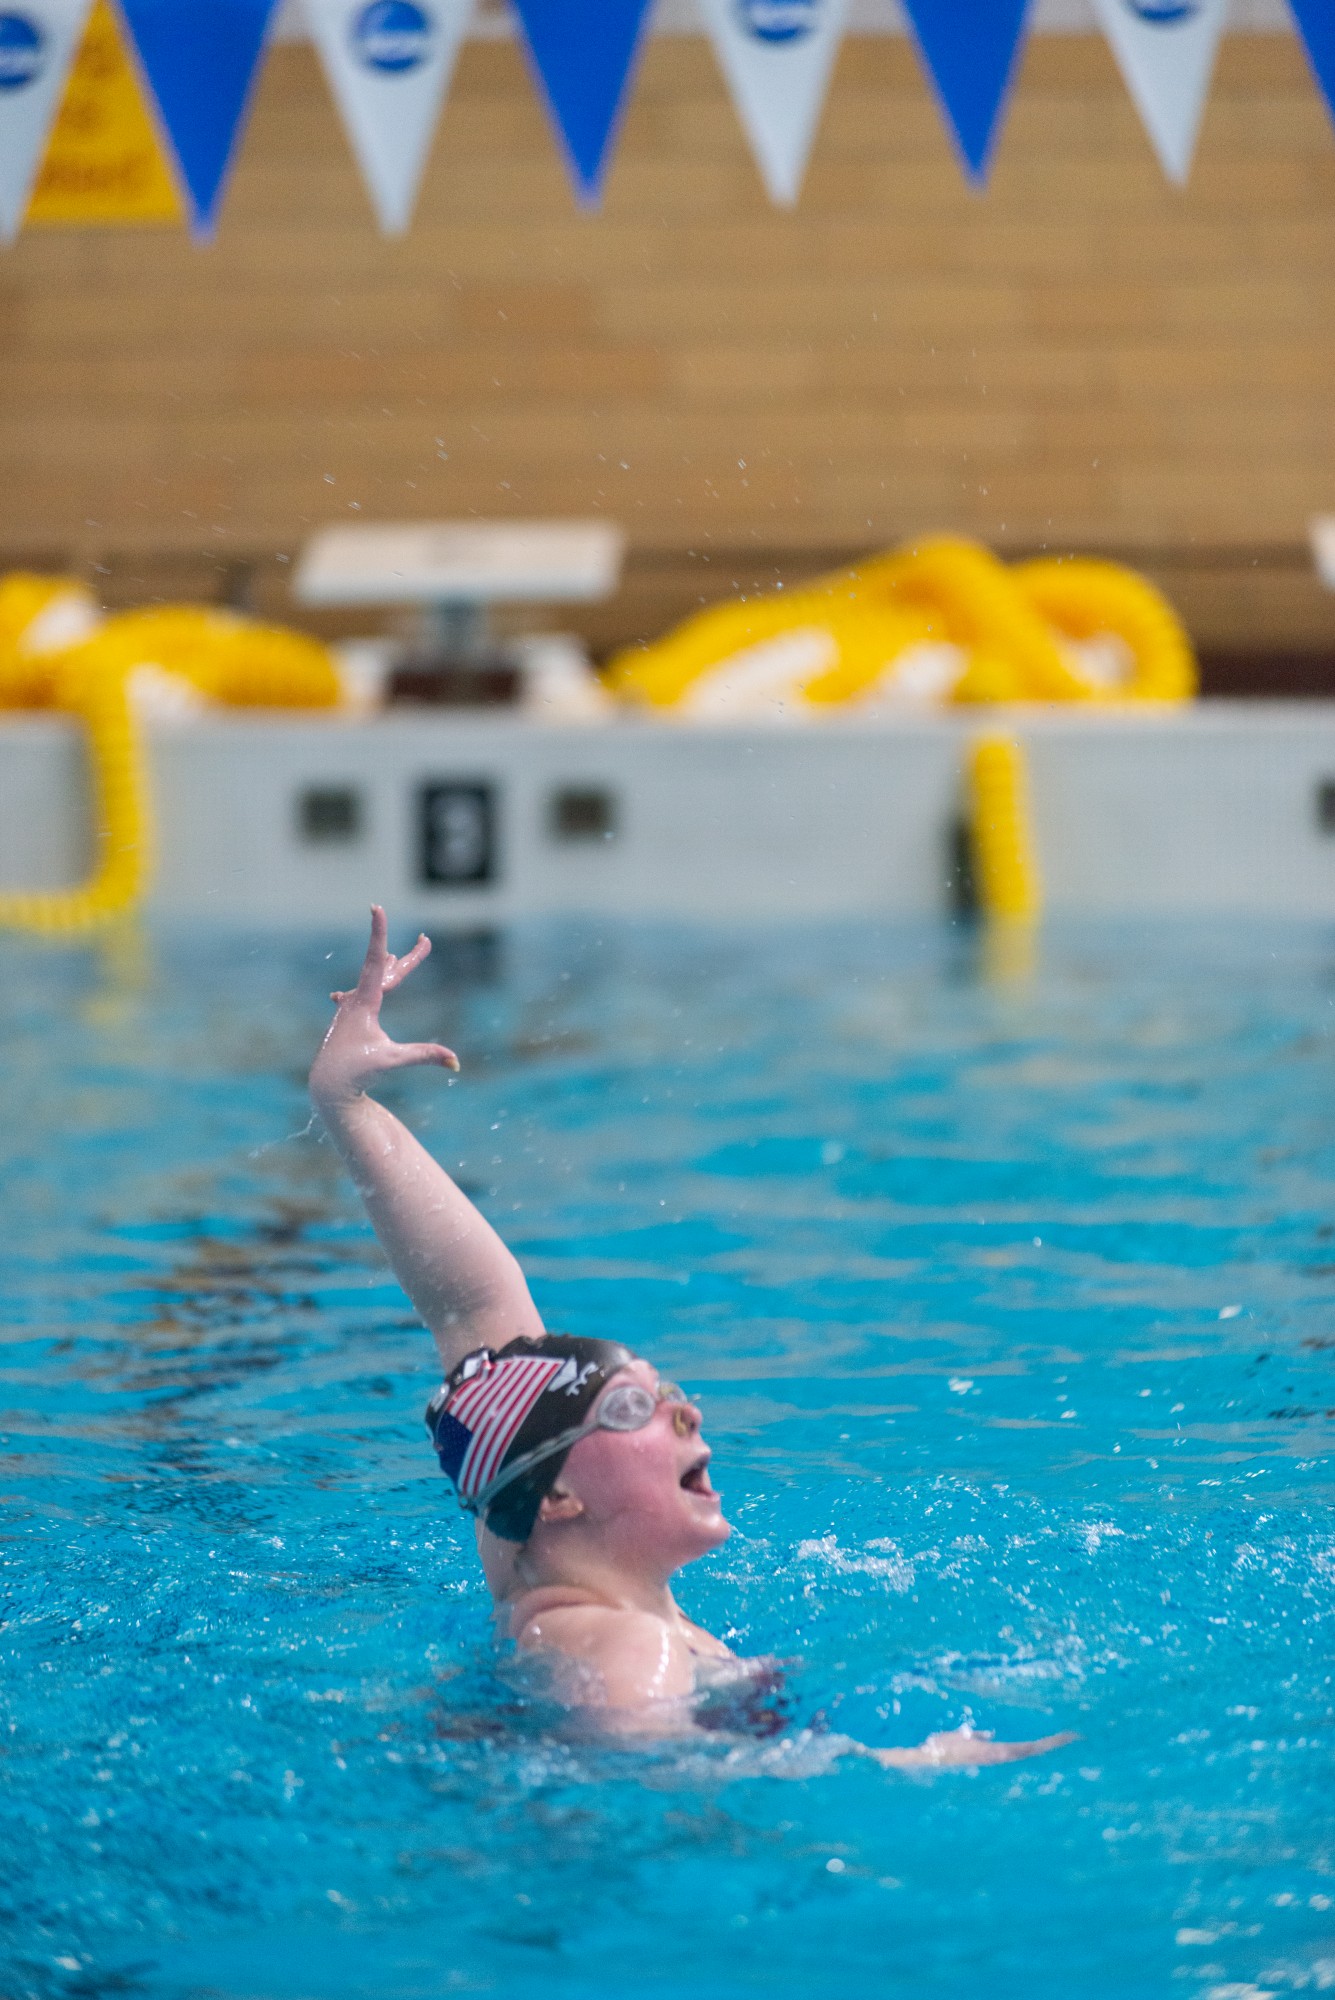 Senior Andrea Dunrud participates in a University of Minnesota Synchronized Swimming Club practice session in Cooke Hall on Wednesday, March 4.